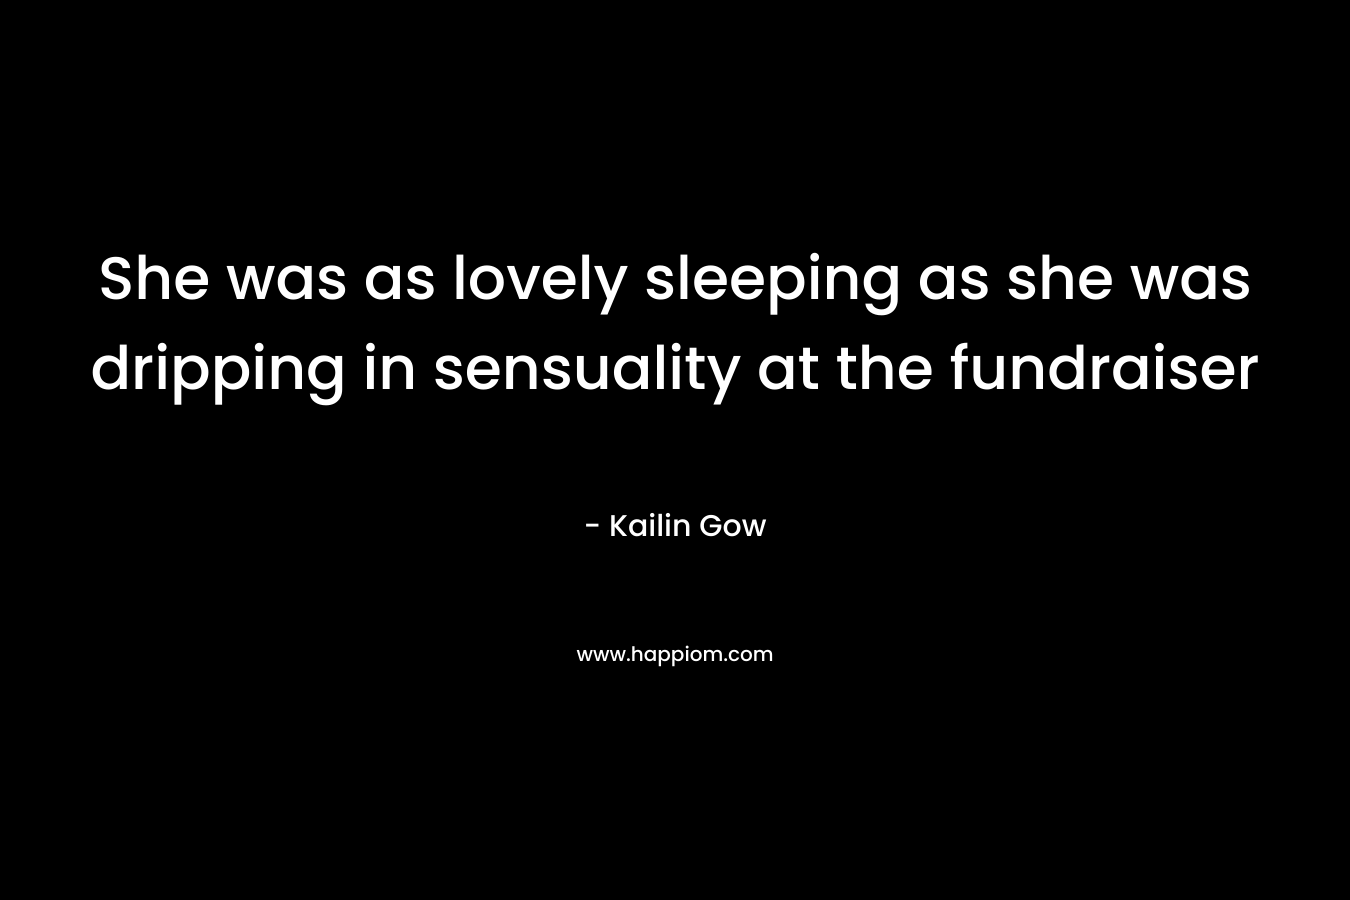 She was as lovely sleeping as she was dripping in sensuality at the fundraiser – Kailin Gow